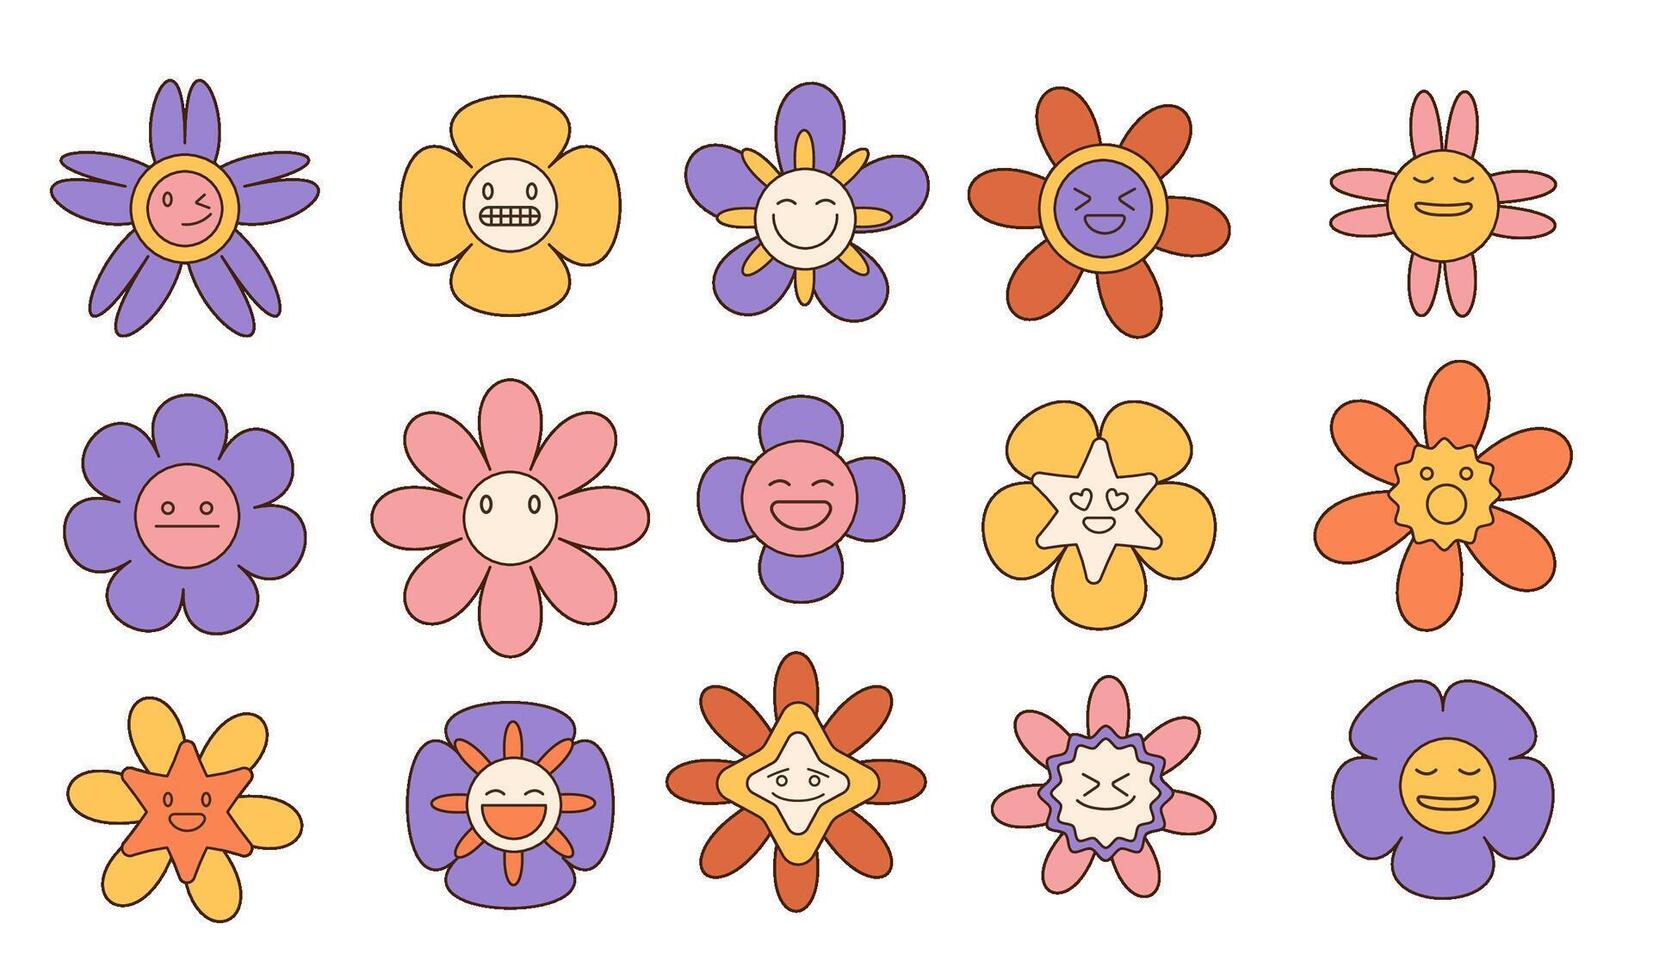 Groovy flower cartoon characters set. Funny happy daisy with linear eyes and smile. Sticker pack in trendy retro trippy style. Isolated vector illustration. Hippie 60s, 70s style.